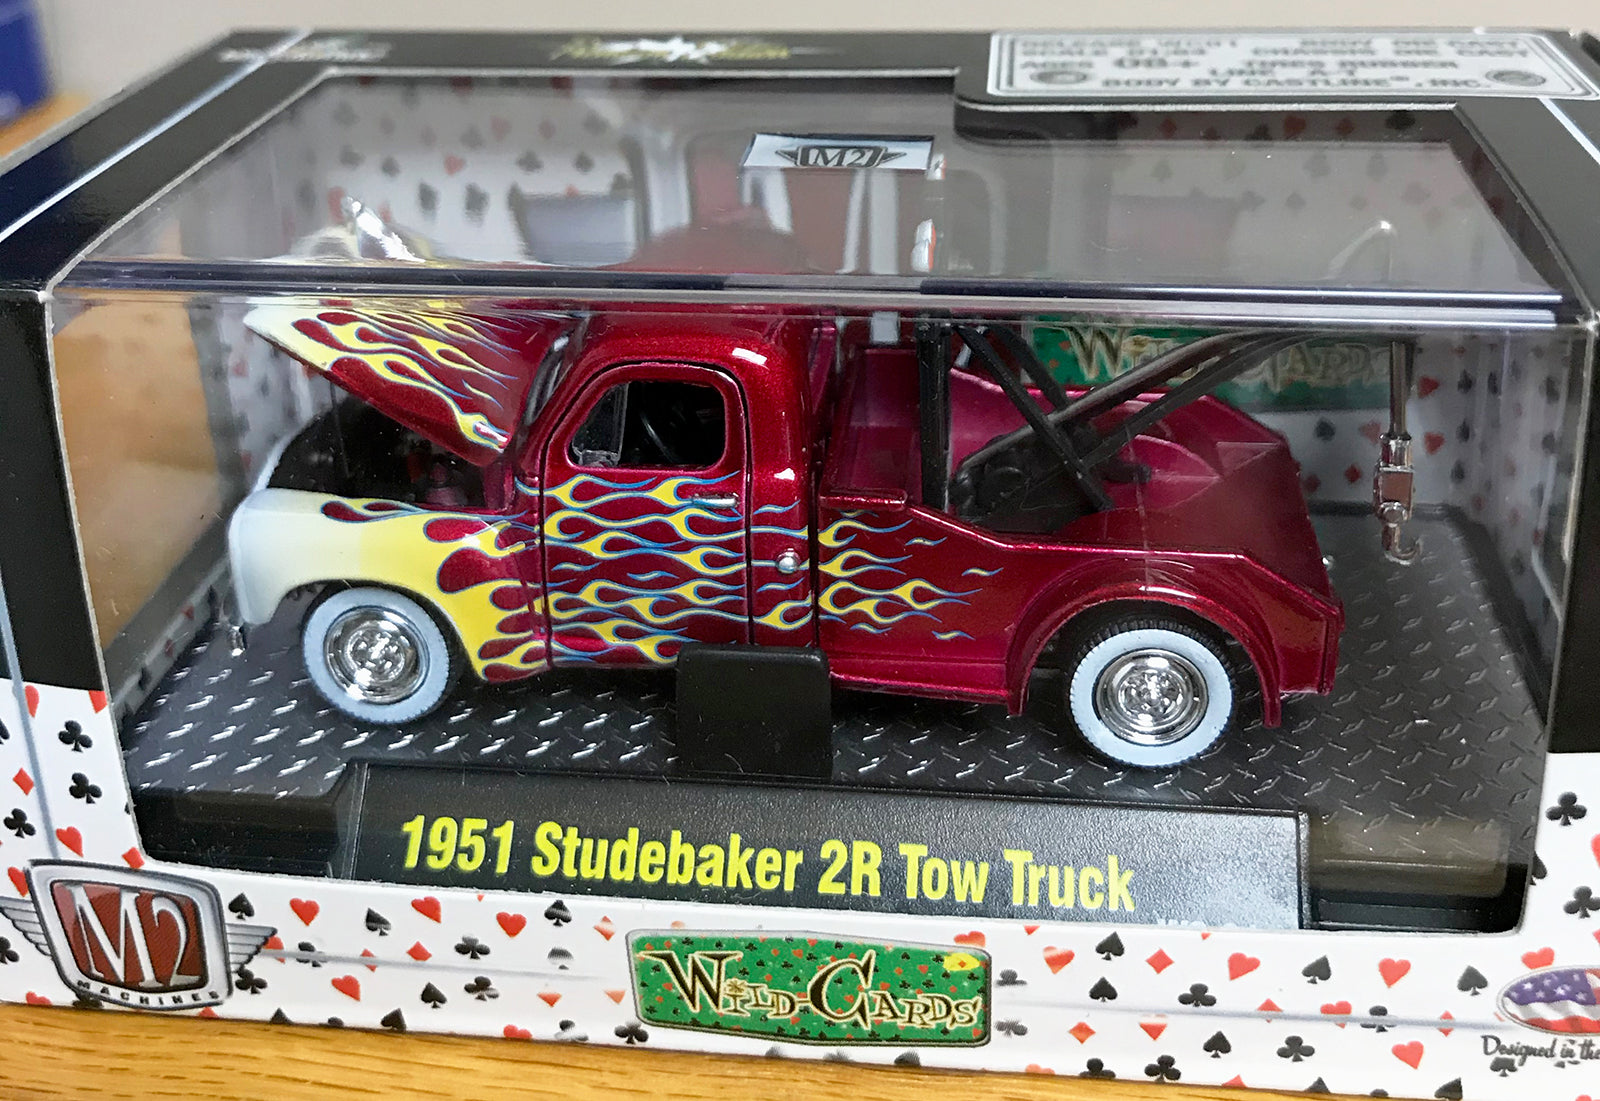 S 1951 Studebaker 2R Tow Truck - Red